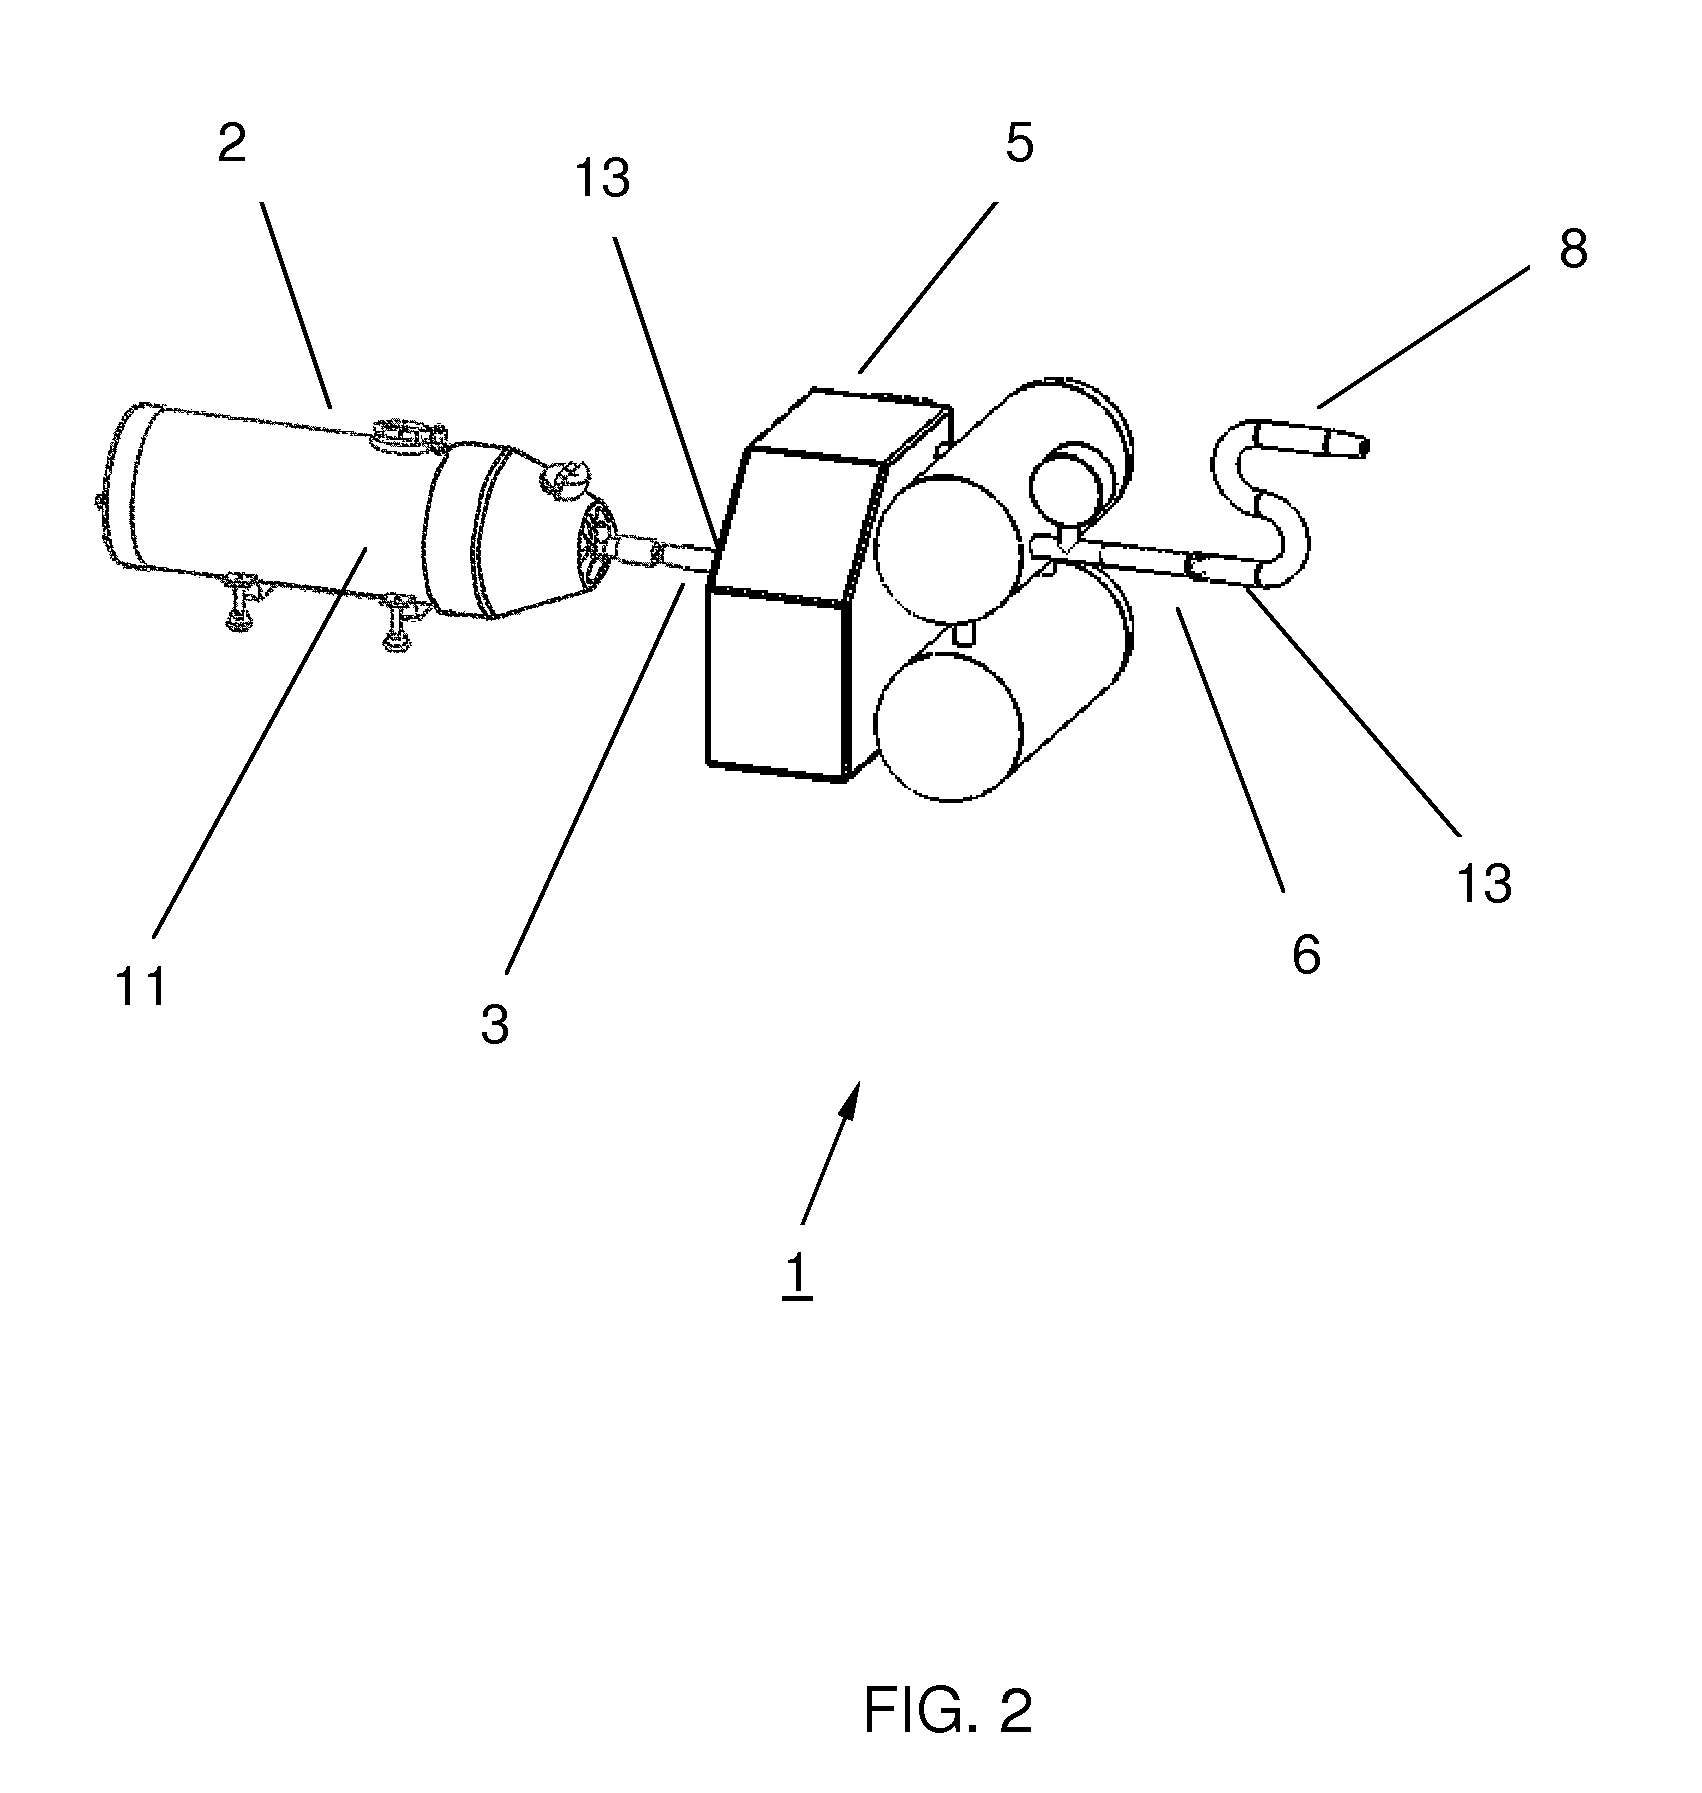 Pressurized point-of-use superheated steam generation apparatus and method